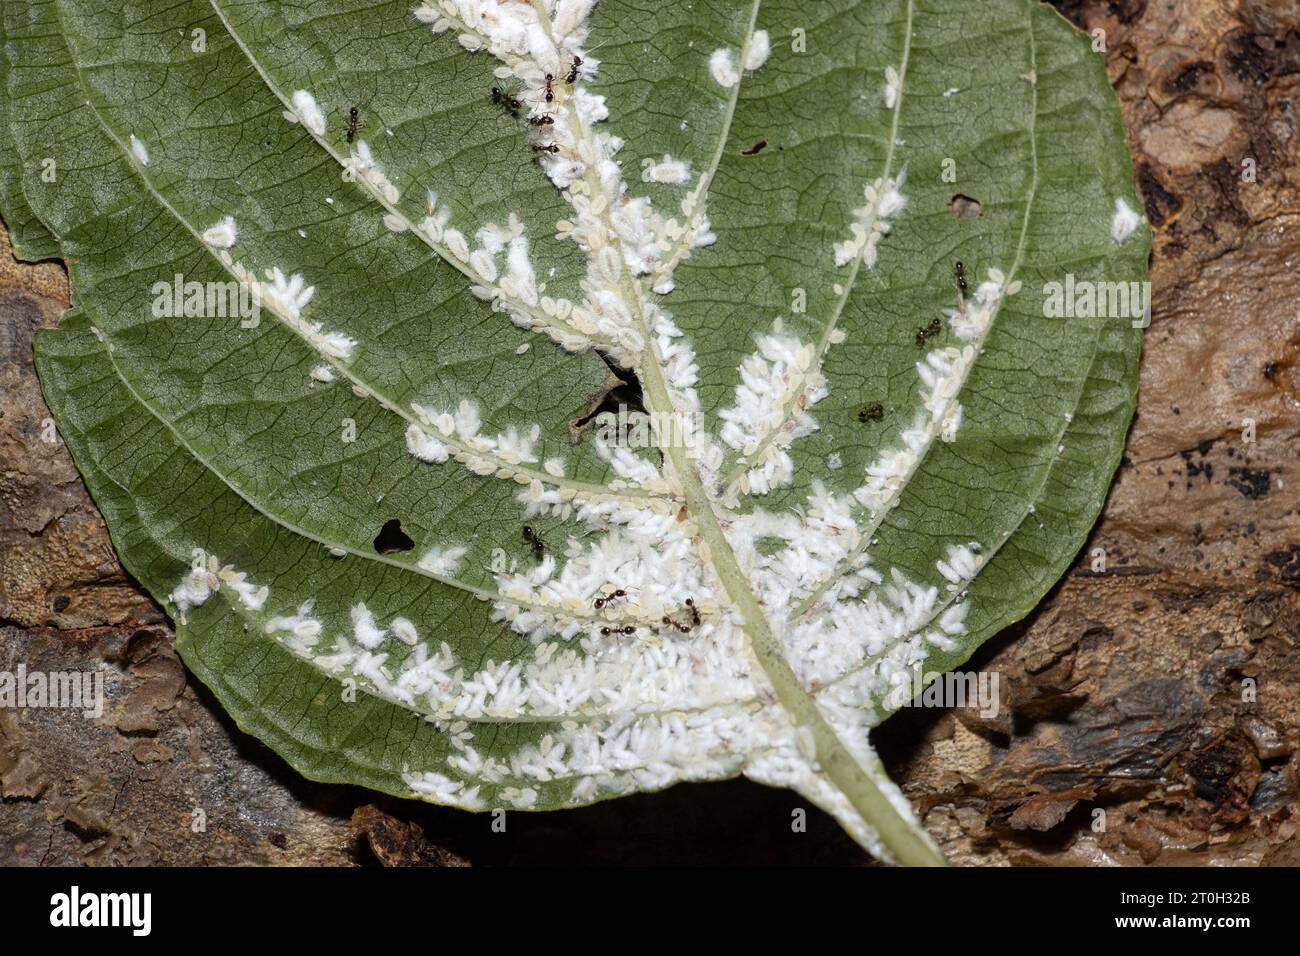 Wax Scale are small members of the mealy bug family. They drink sap from the plant they infect and produce large quantities of honeydew. Stock Photo